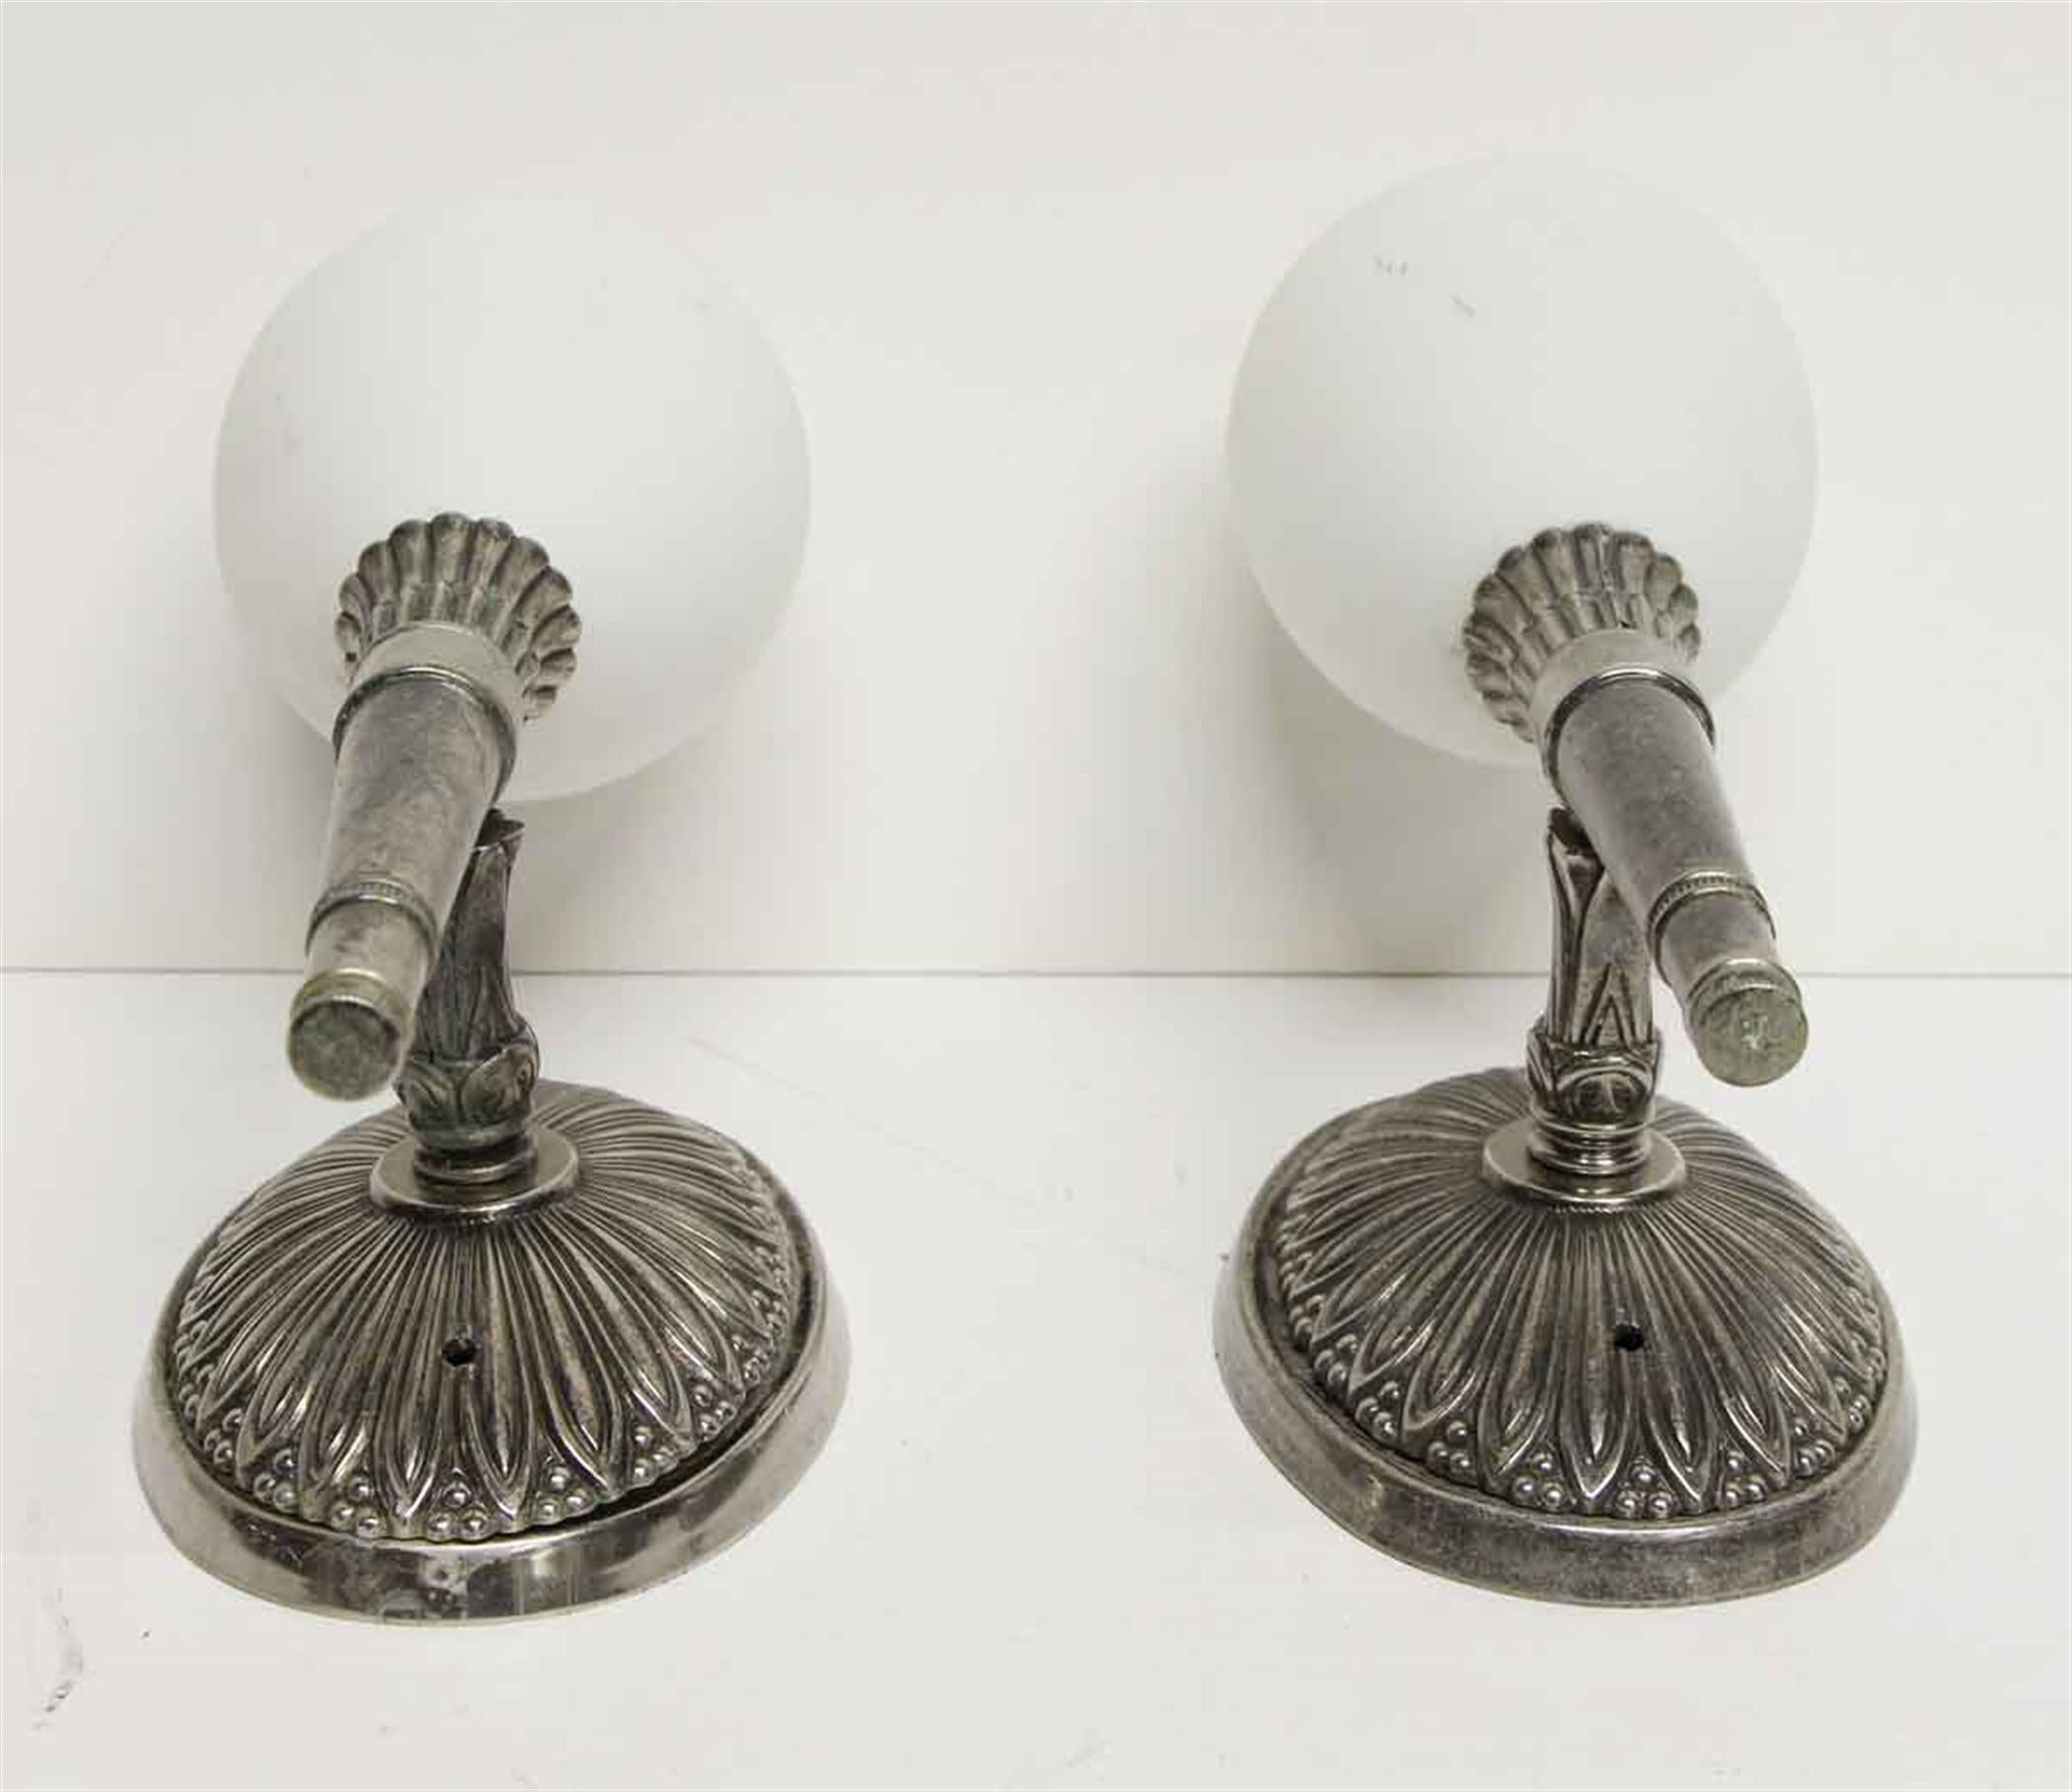 American 1940s Pair of NY Waldorf Astoria Hotel Single Arm Silver Plated Brass Sconces